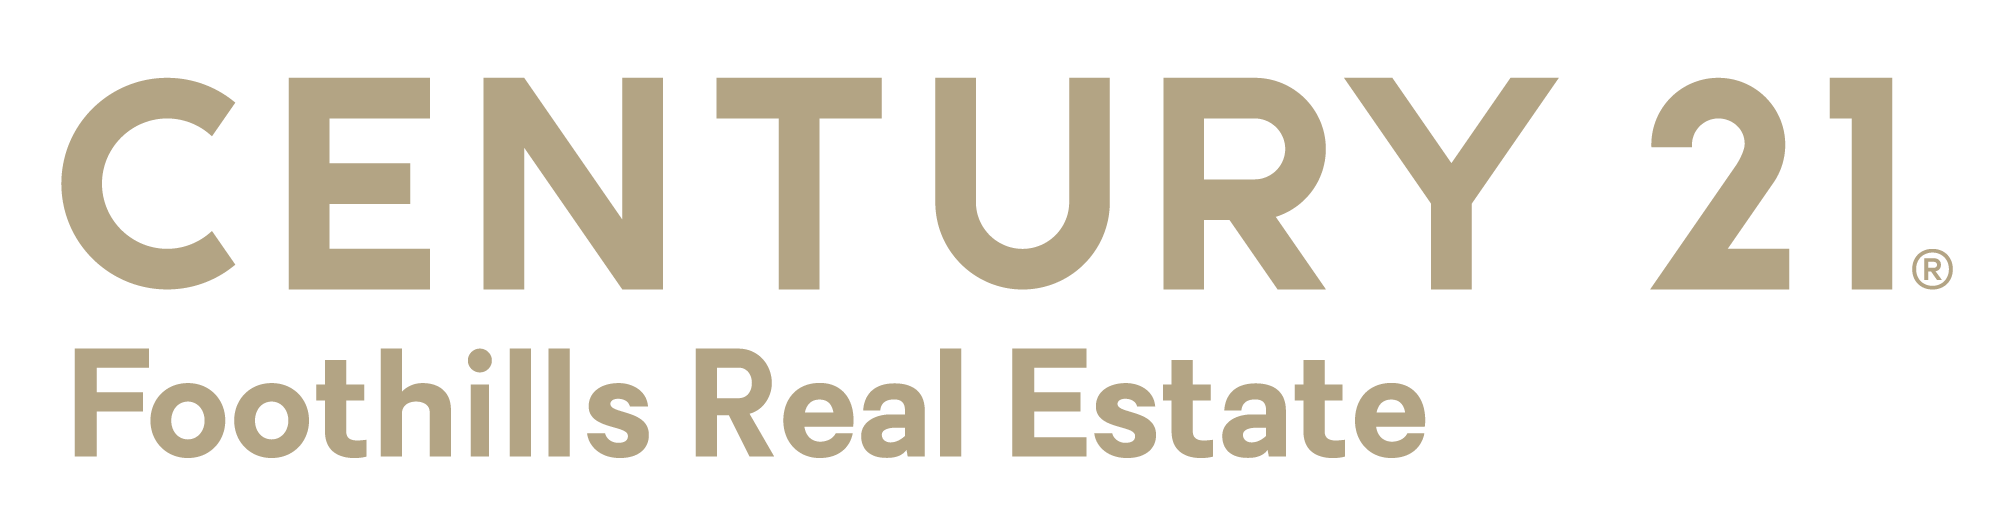 Gold letters on white background showing logo of Century 21 Foothills Real Estate, sponsor